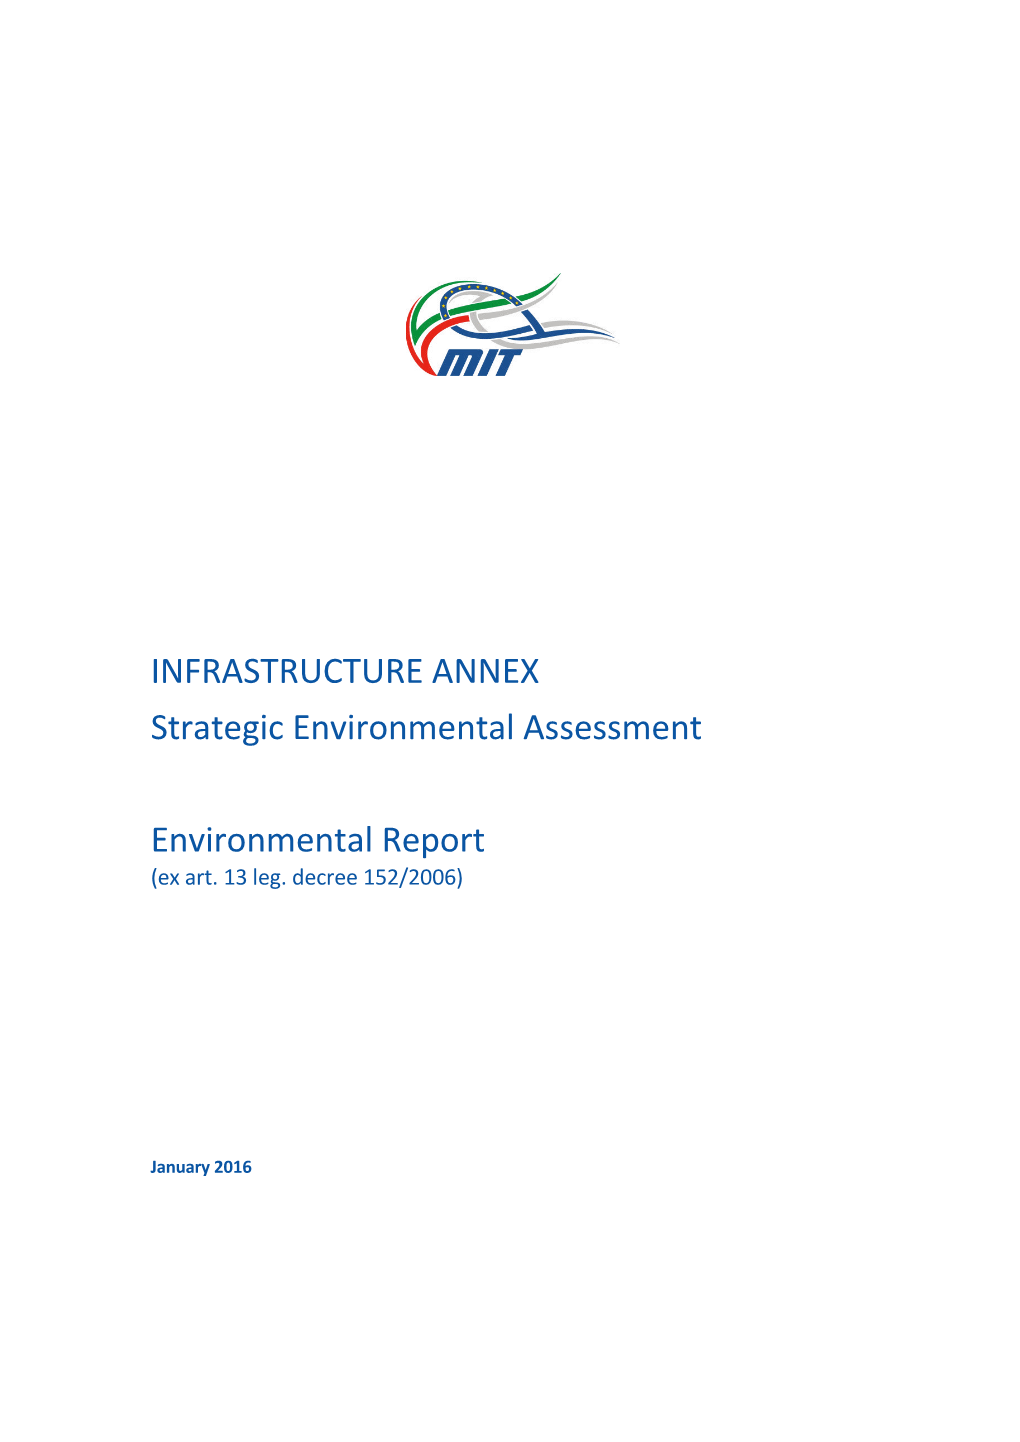 Strategic Environmental Assessment of the Infrastructure Annex to the Def